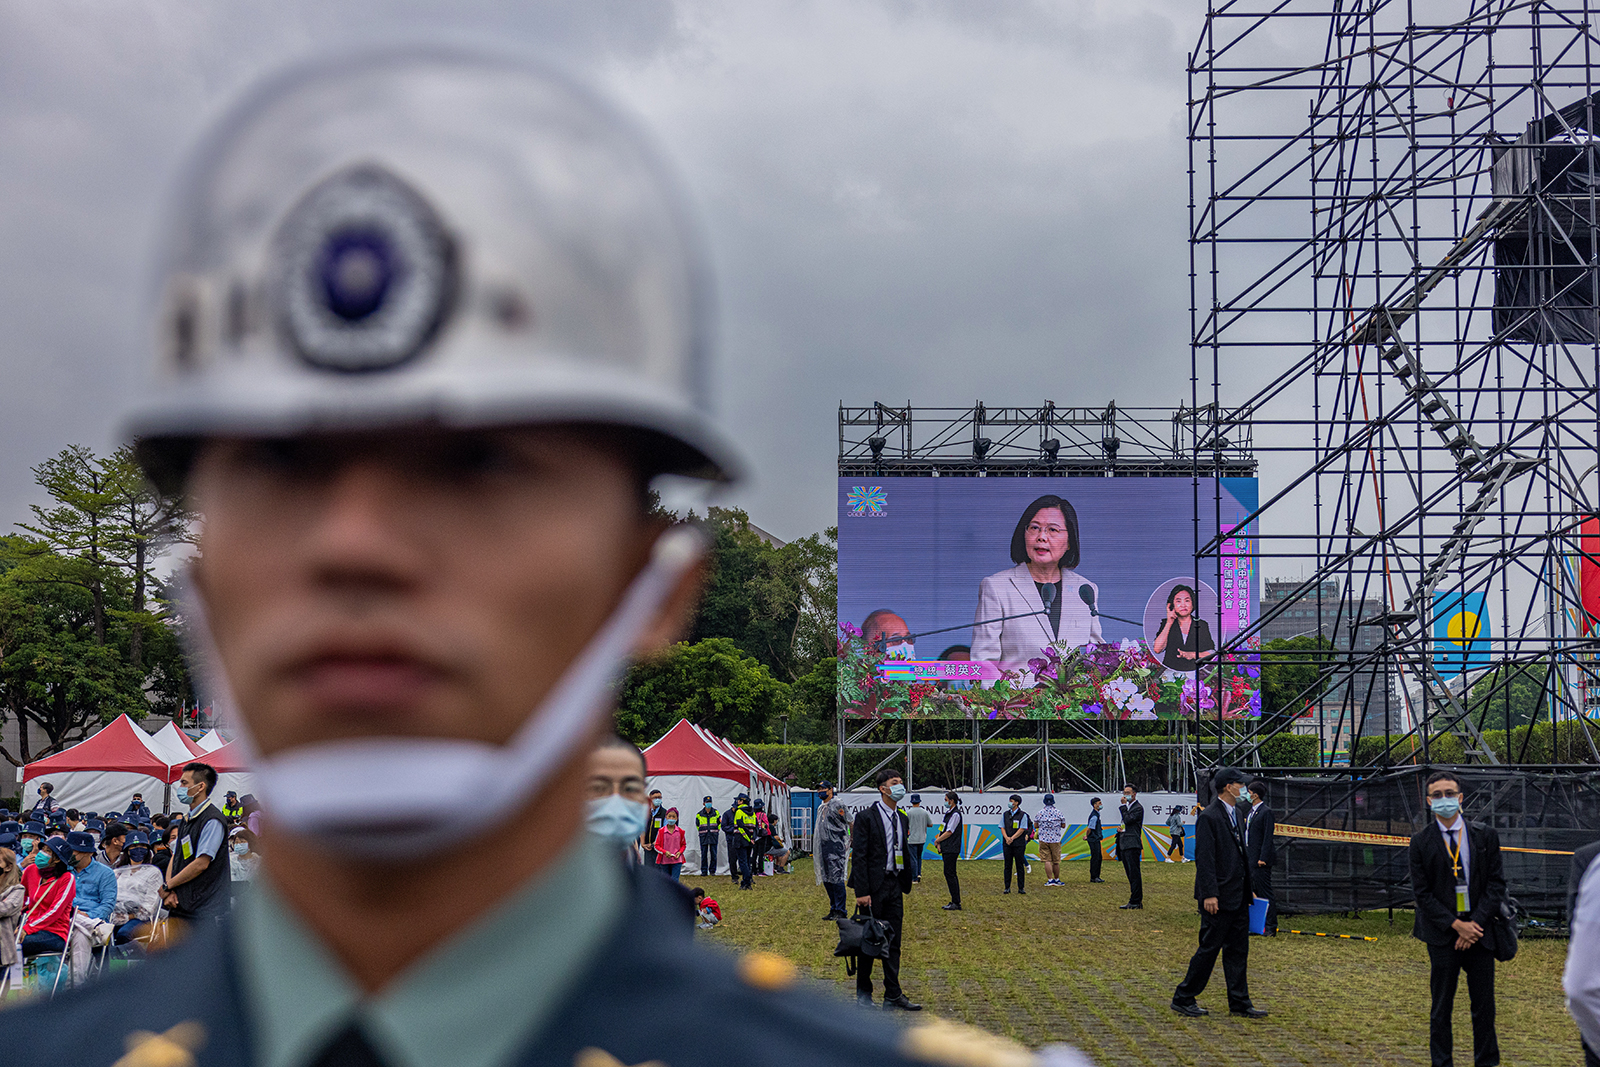 Taiwan's President Tsai Ing-wen gives a speech on the Taiwan's National Day on October 10.